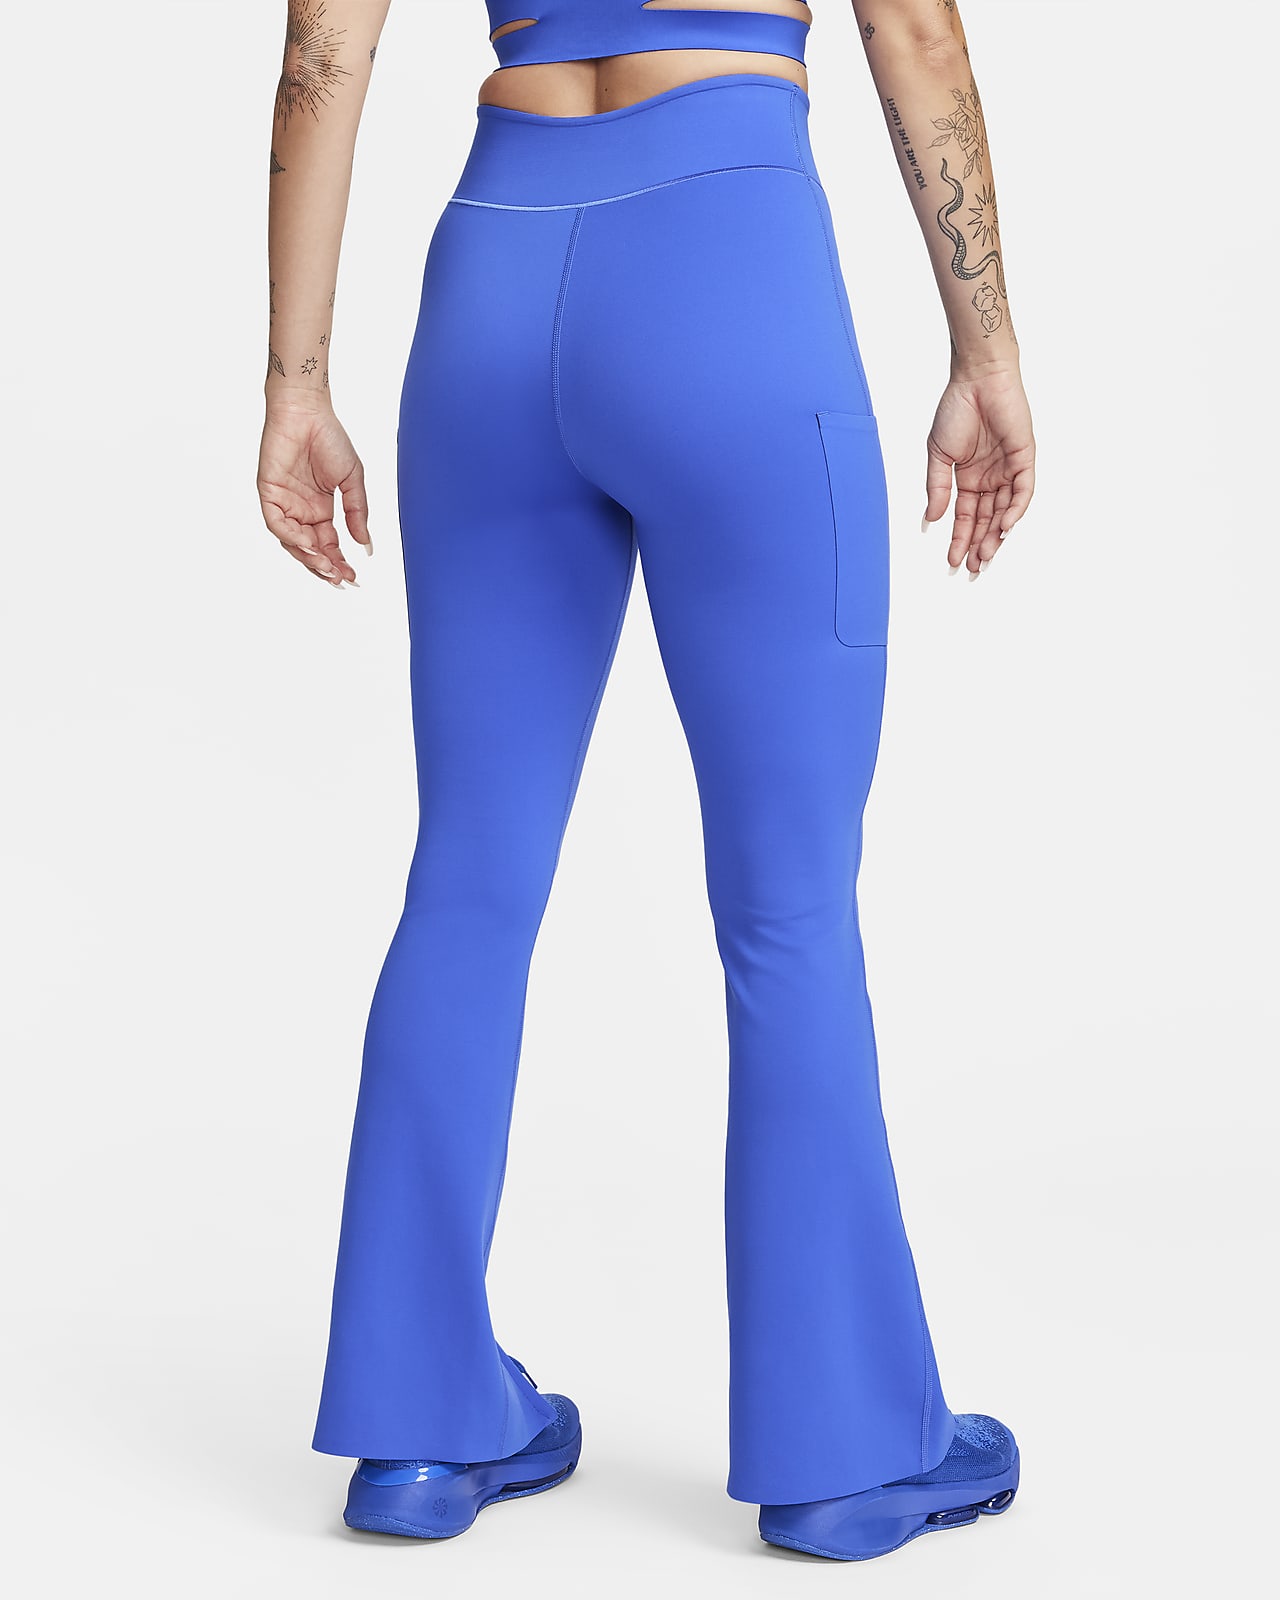 Nike FutureMove Women's Dri-FIT High-Waisted Pants with Pockets.